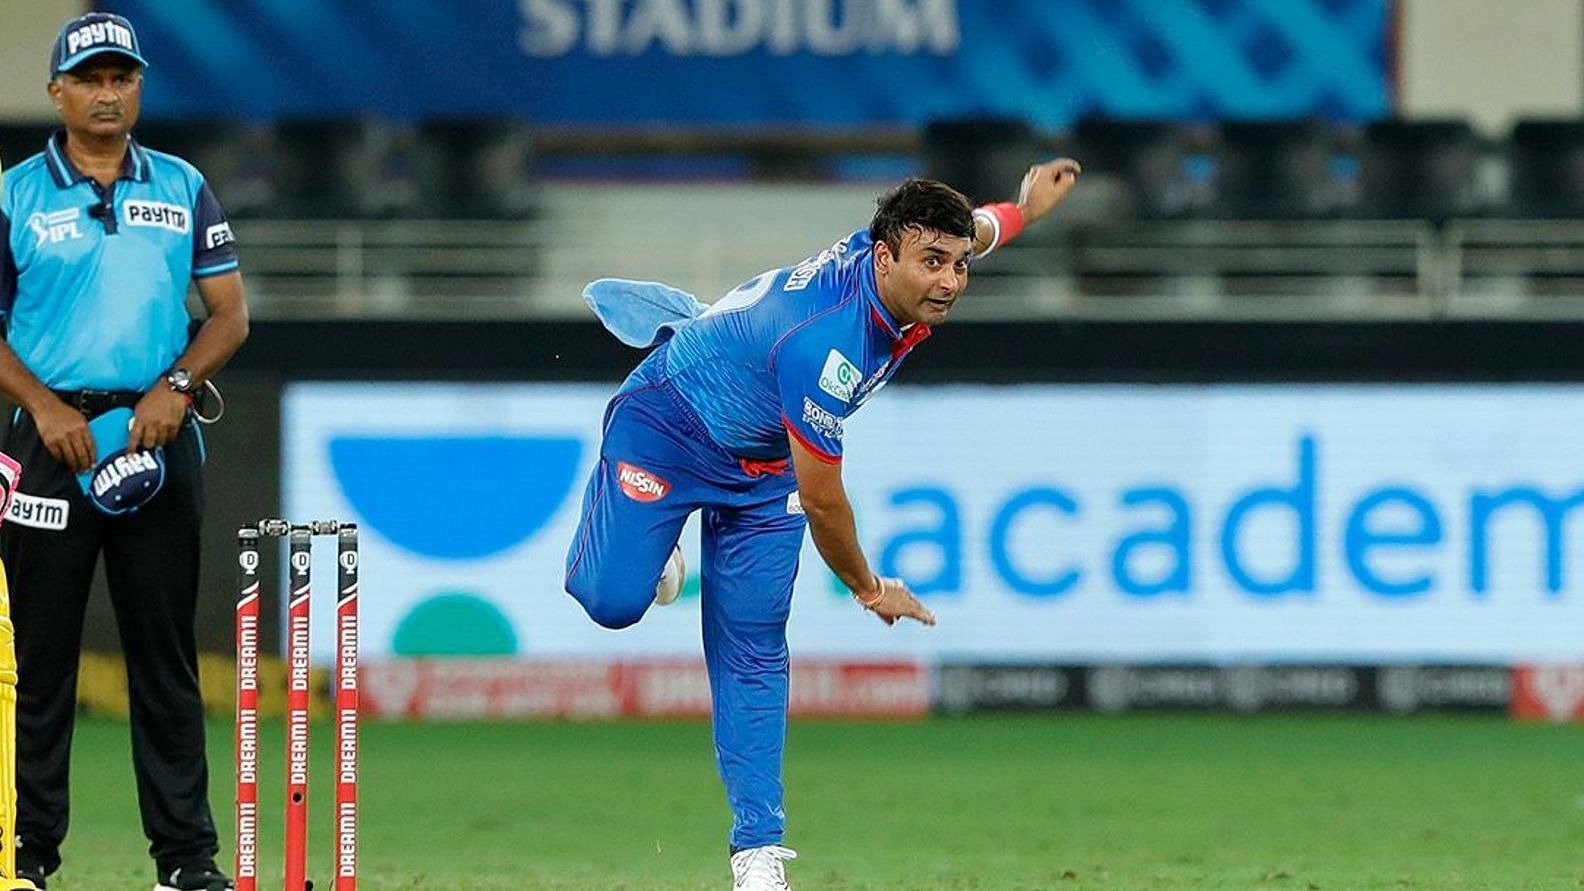 Delhi Capitals’ Amit Mishra bowled an economical spell to slow down the scoring against Chennai Super Kings, playing his first match of IPL 2020.